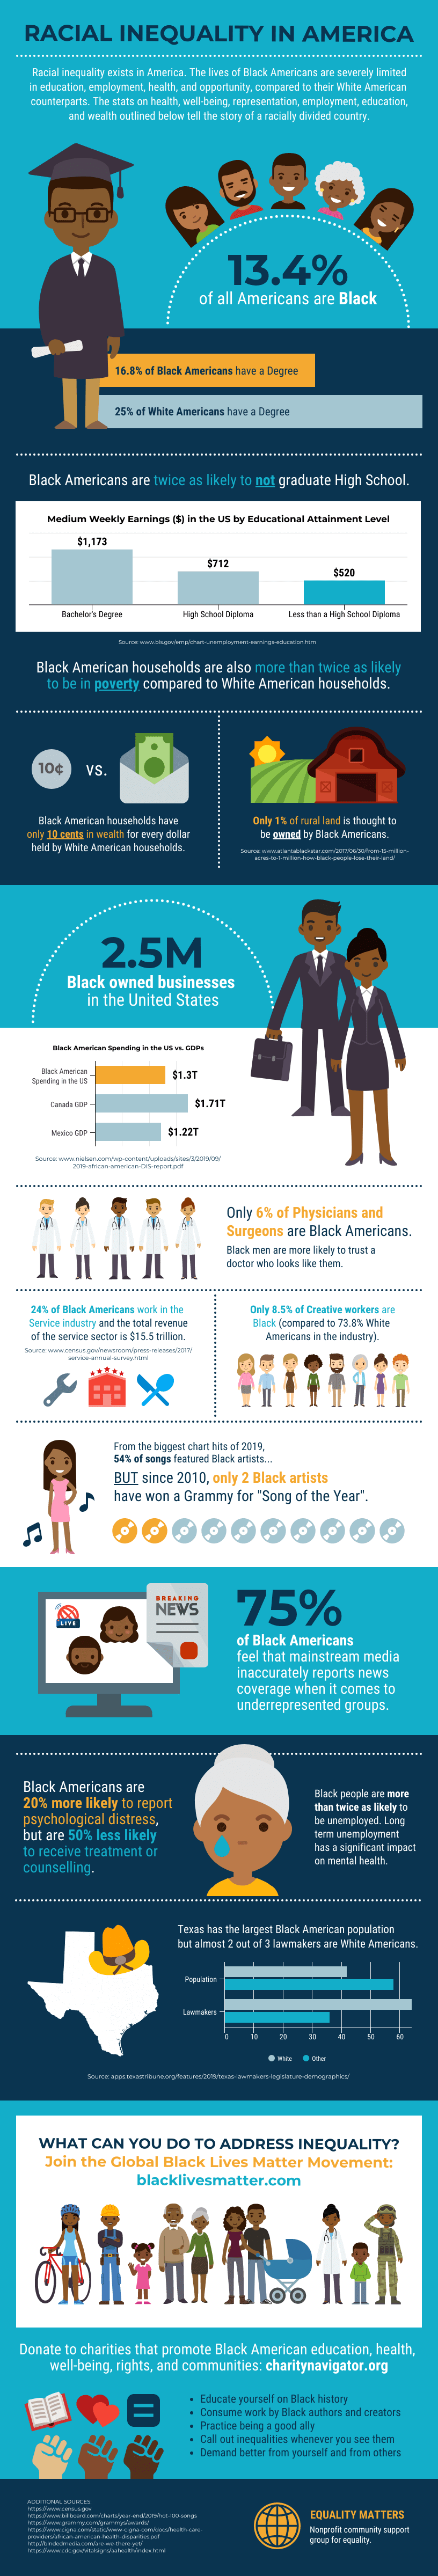 how to create an infographic on racial inequality in the US statistics